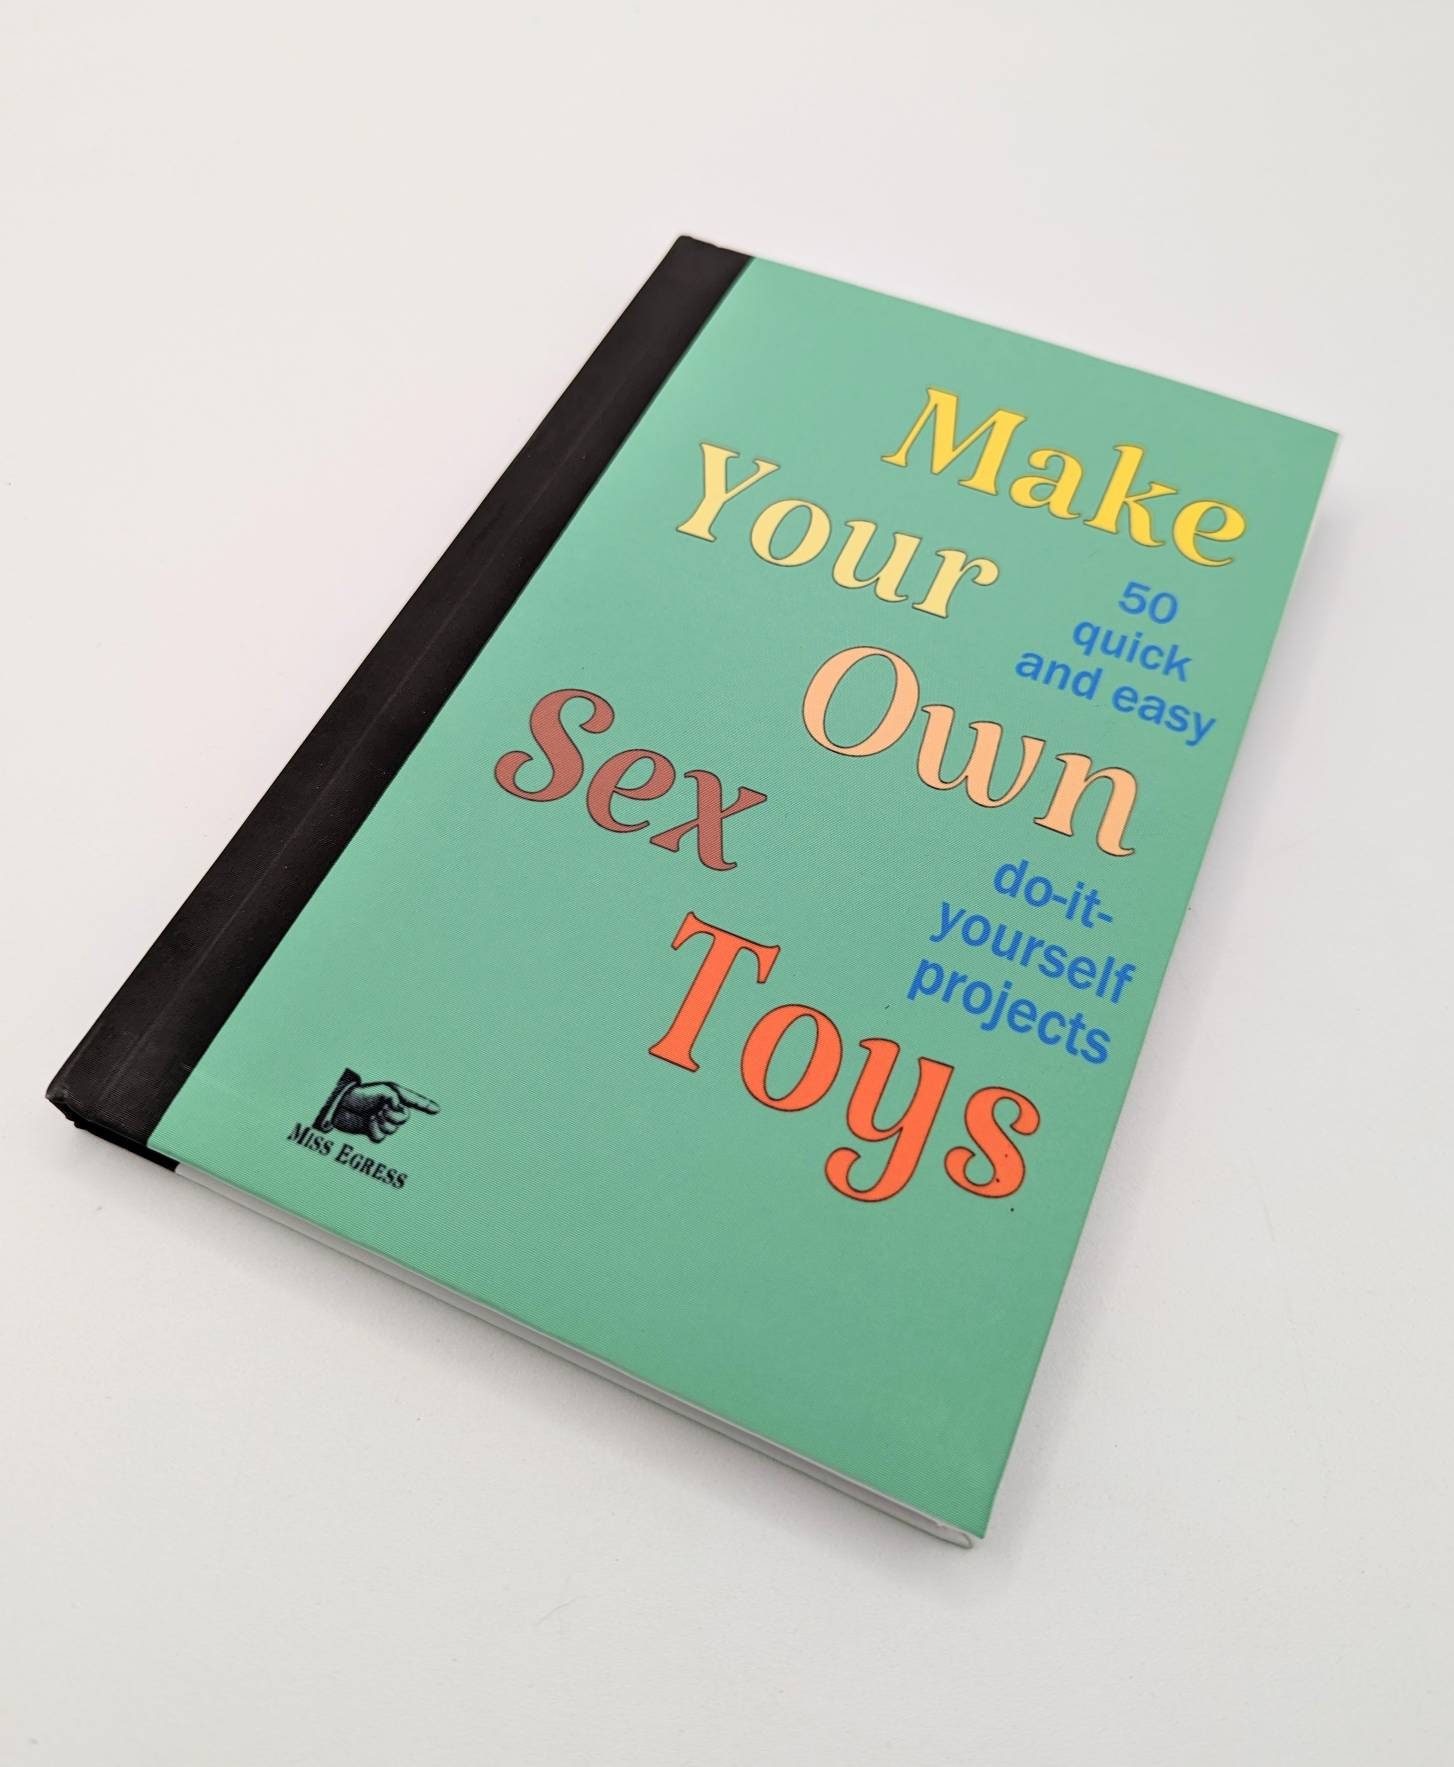 homemade do-it-yourself sex toy